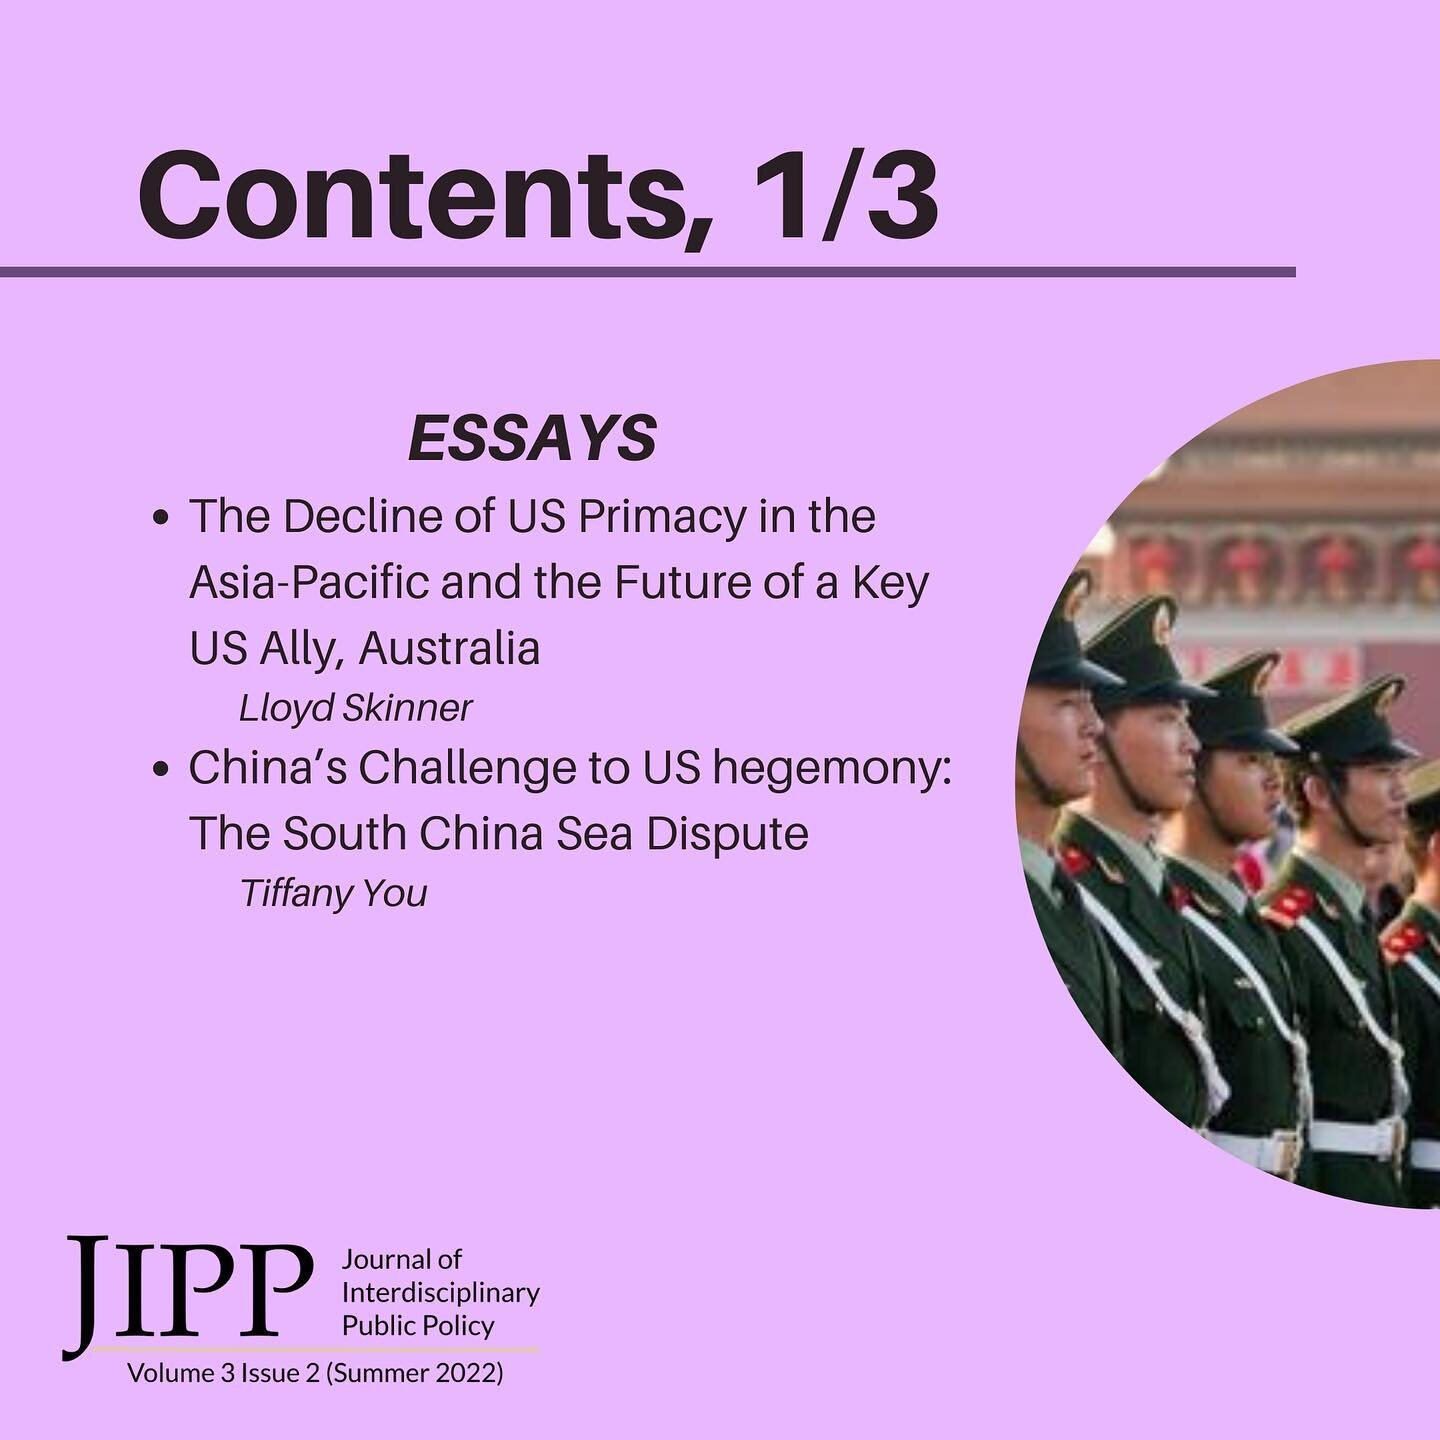 First up&mdash;two incredible essays on foreign policy! 🙌

The Journal of Interdisciplinary Public Policy is a journal aimed at elevating student voices on current policy issues. Learn more at www.jipp.org or the link in @jipporg bio.